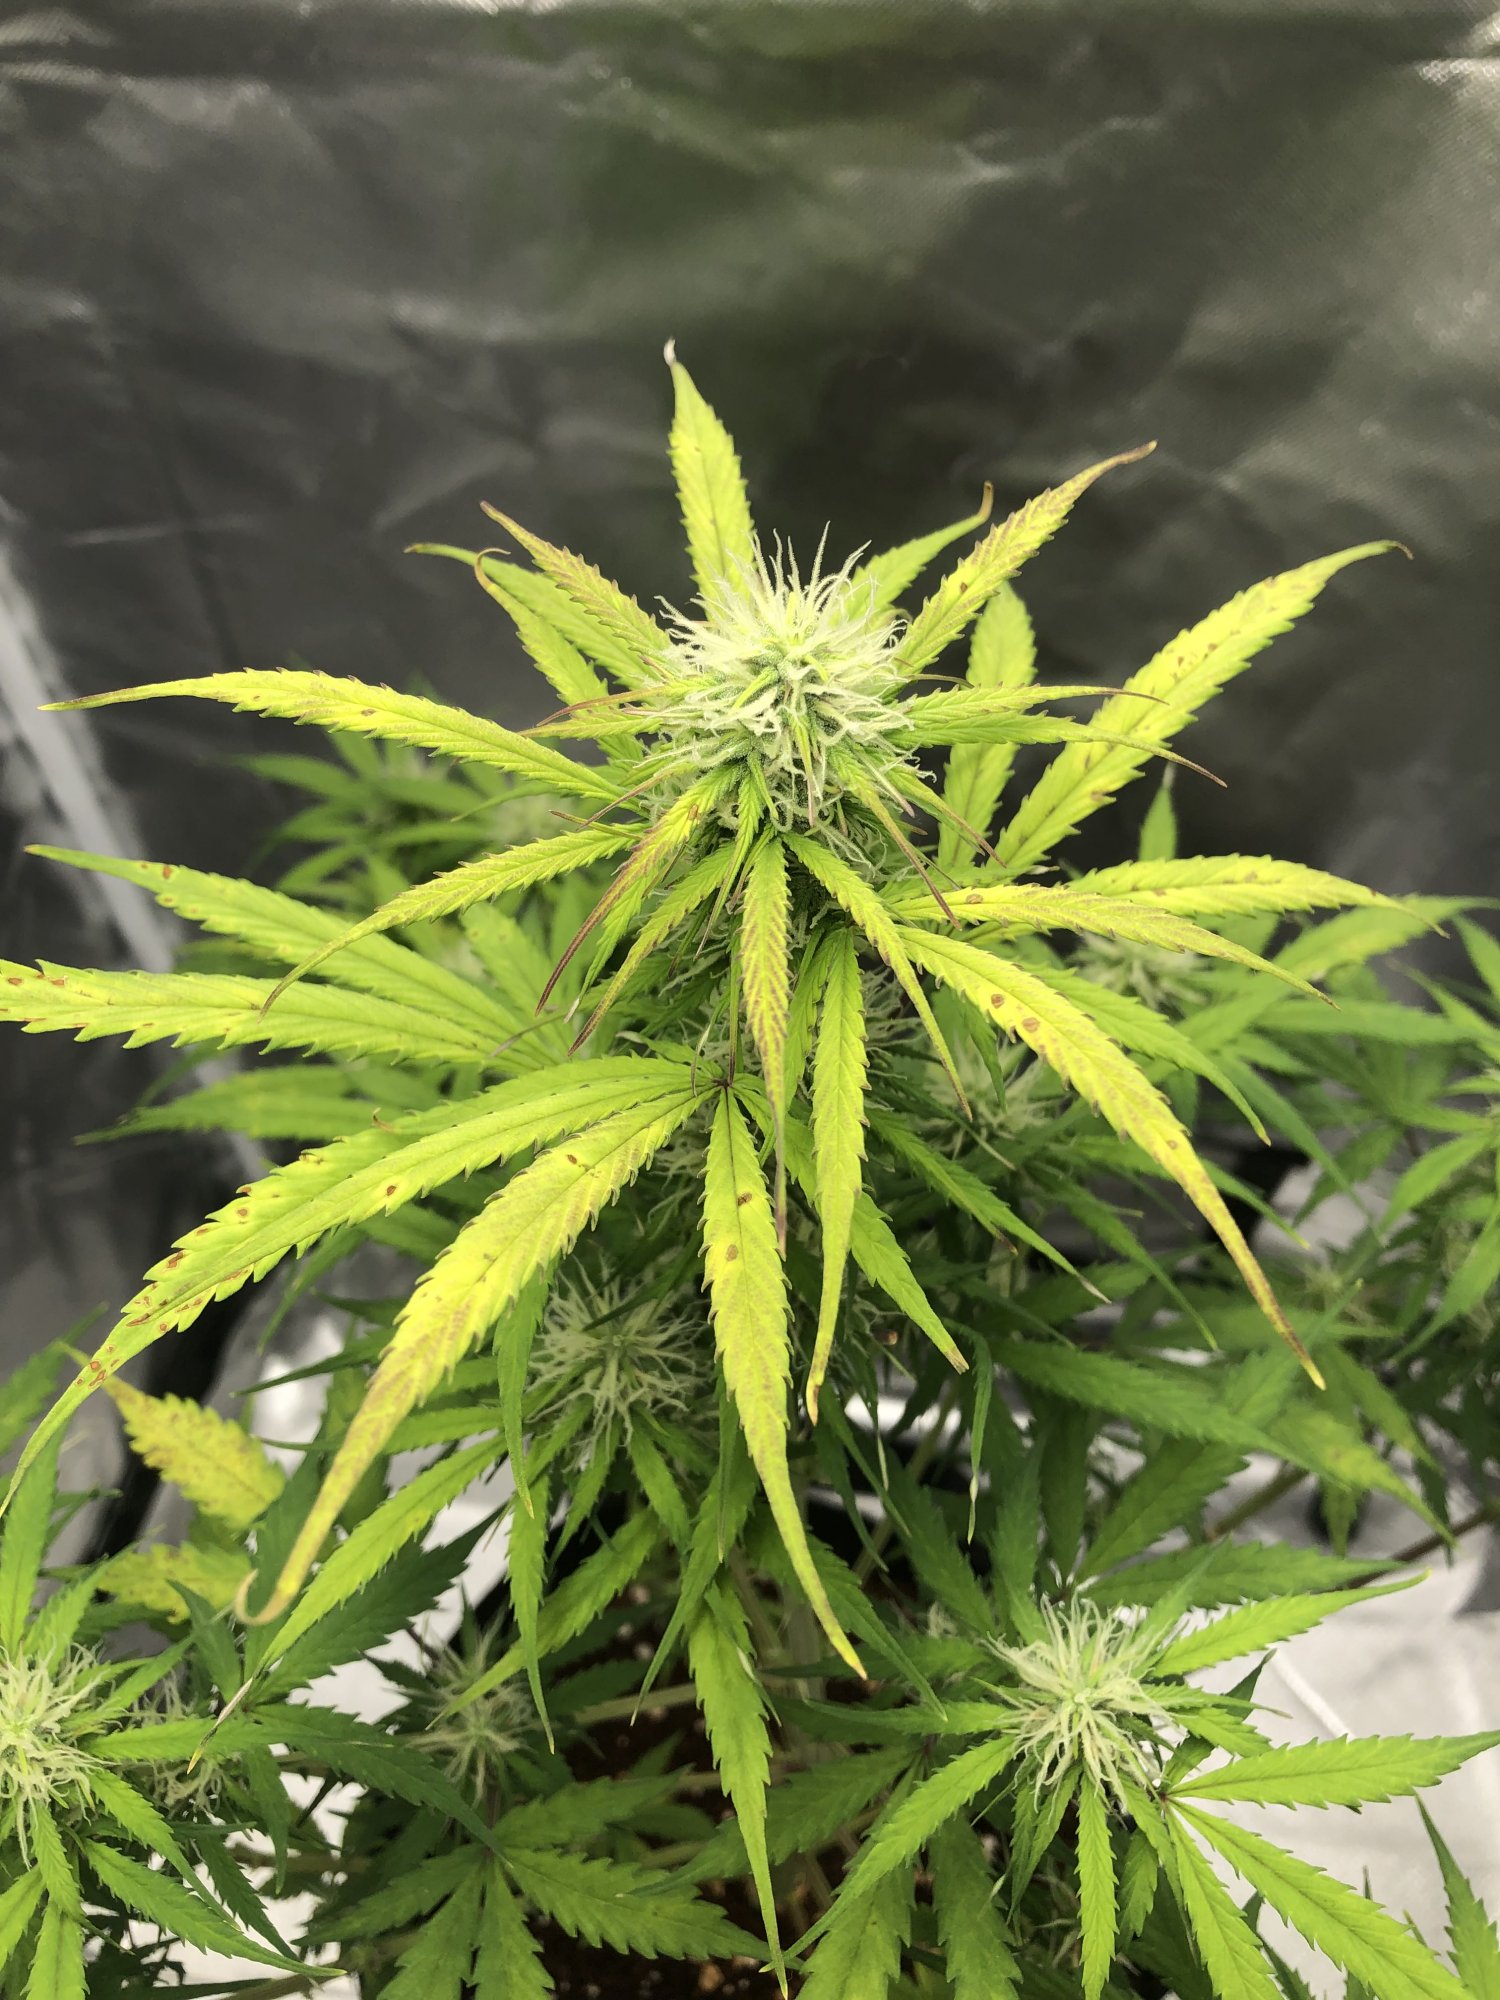 Help leaves turning yellow with spots 2